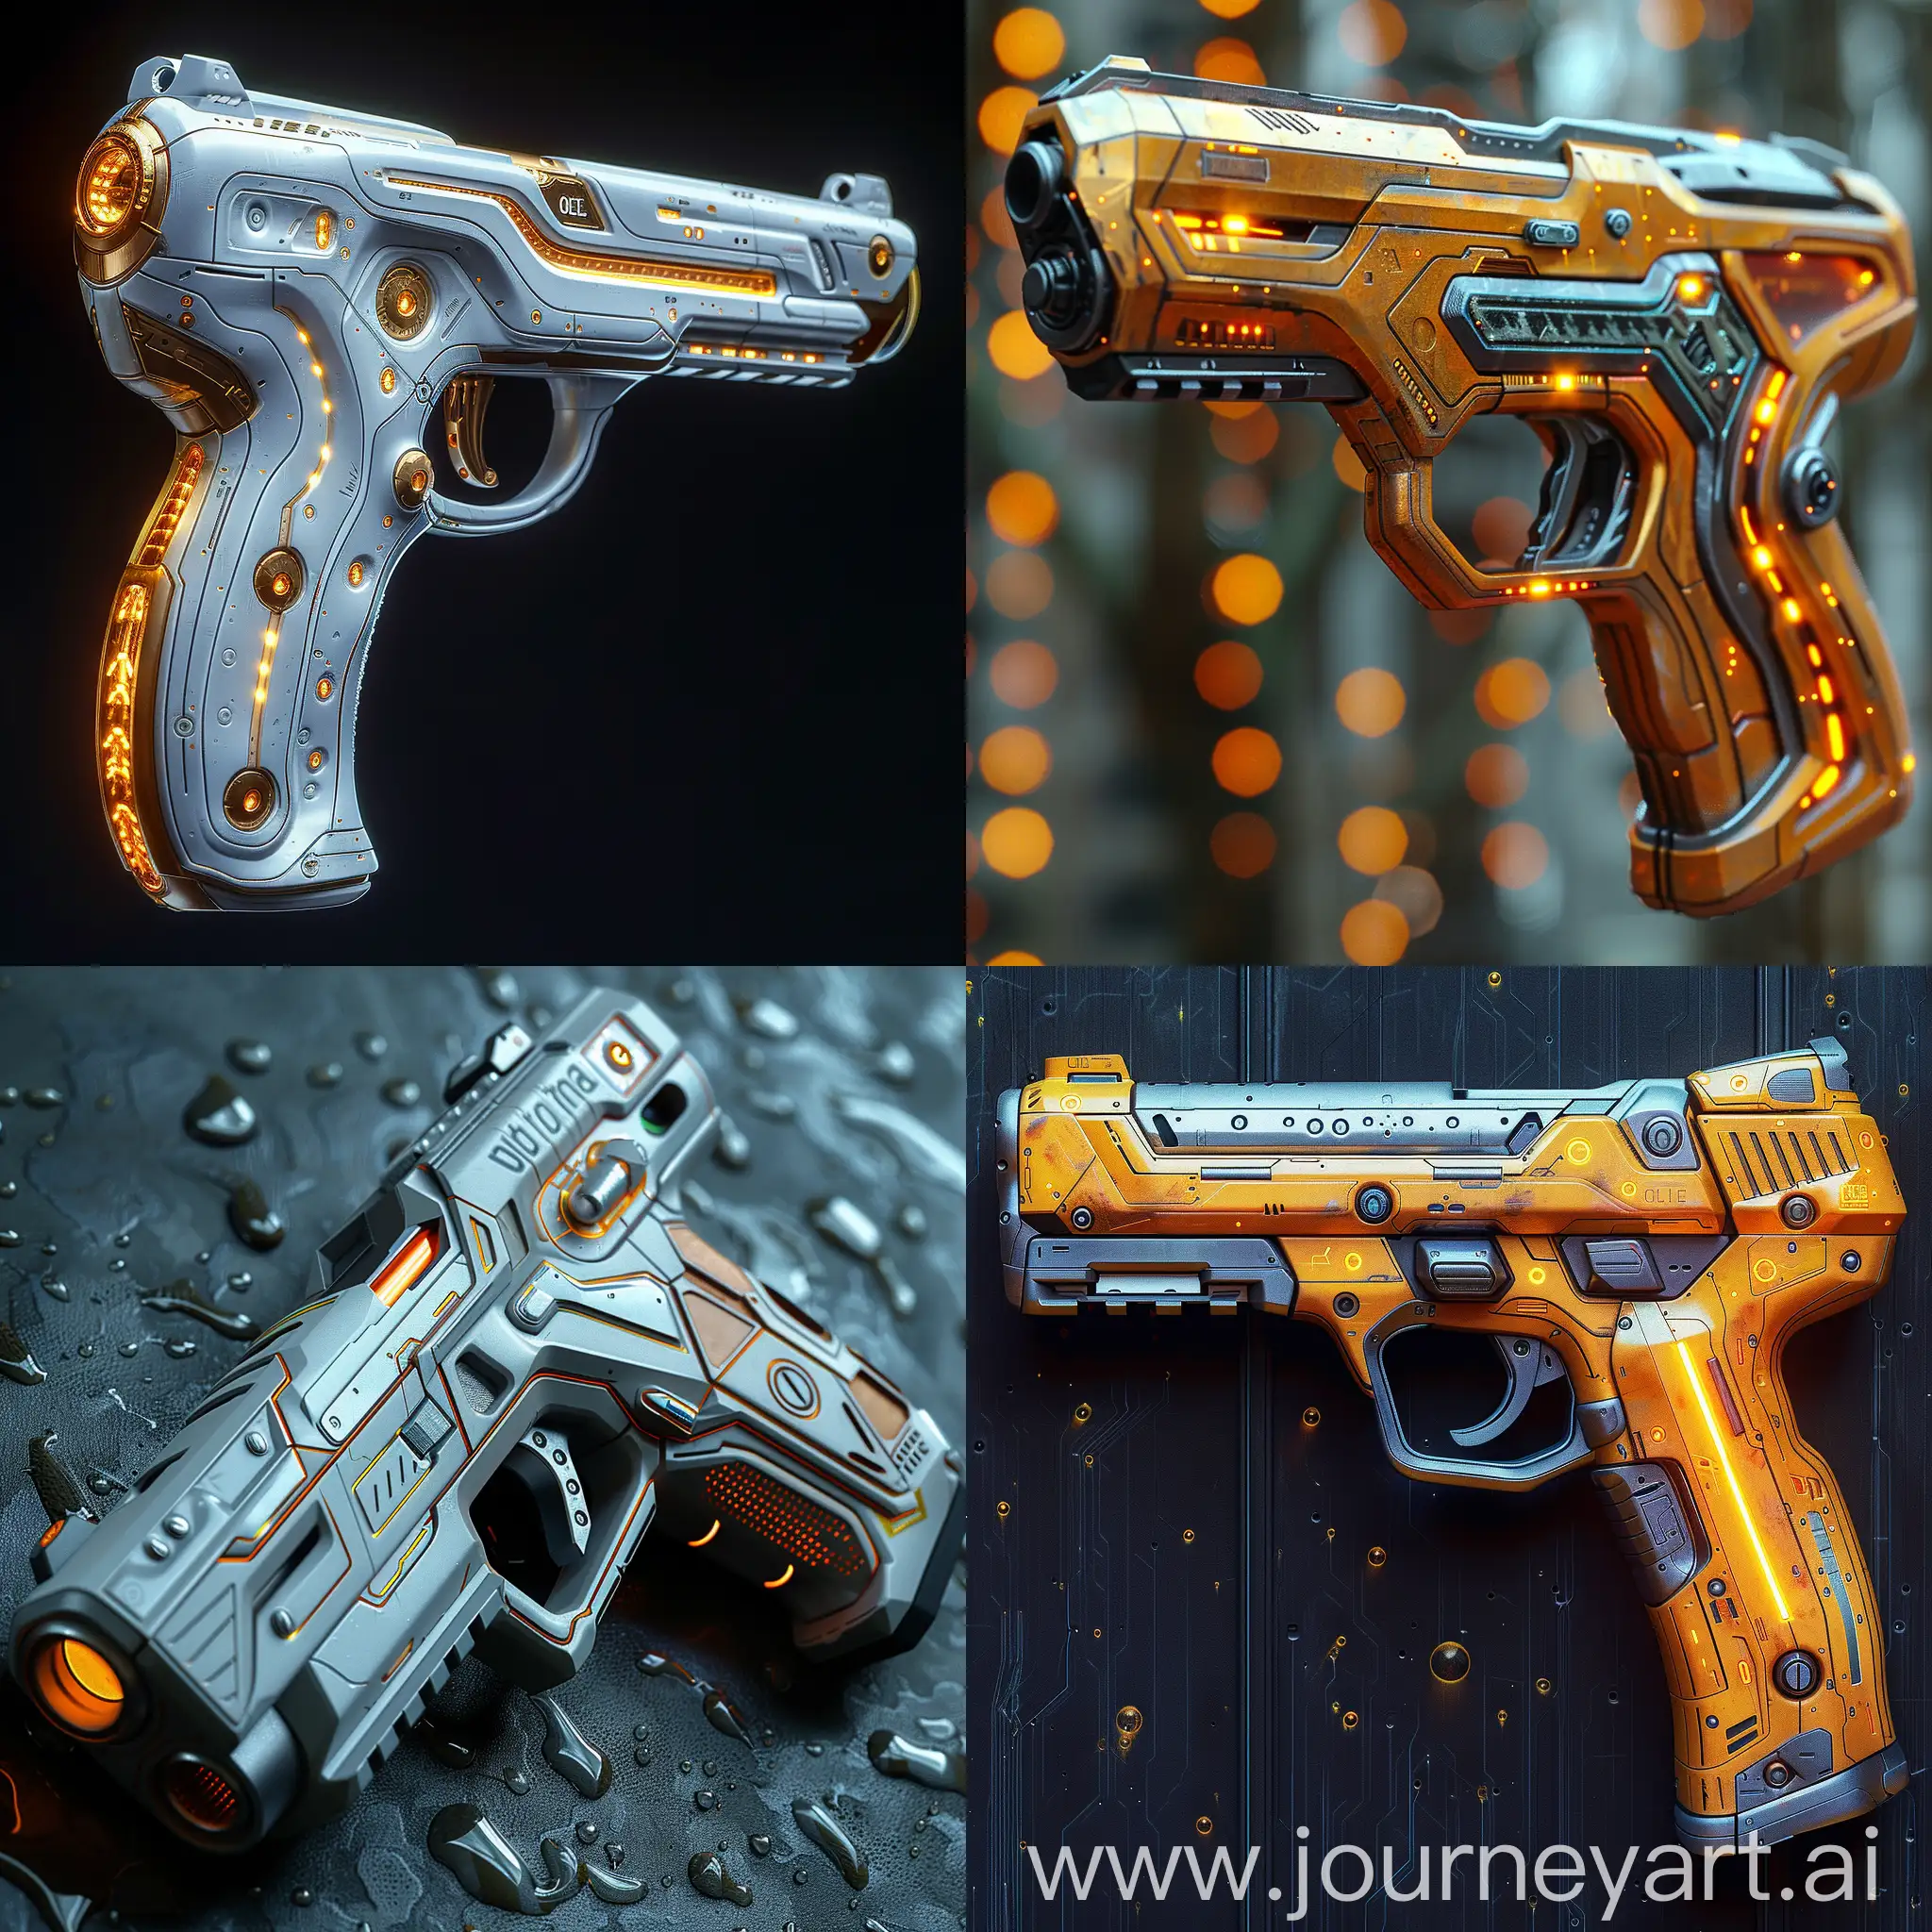 Futuristic-UltraModern-Pistol-with-Nanotechnology-Materials-and-OLED-Lighting